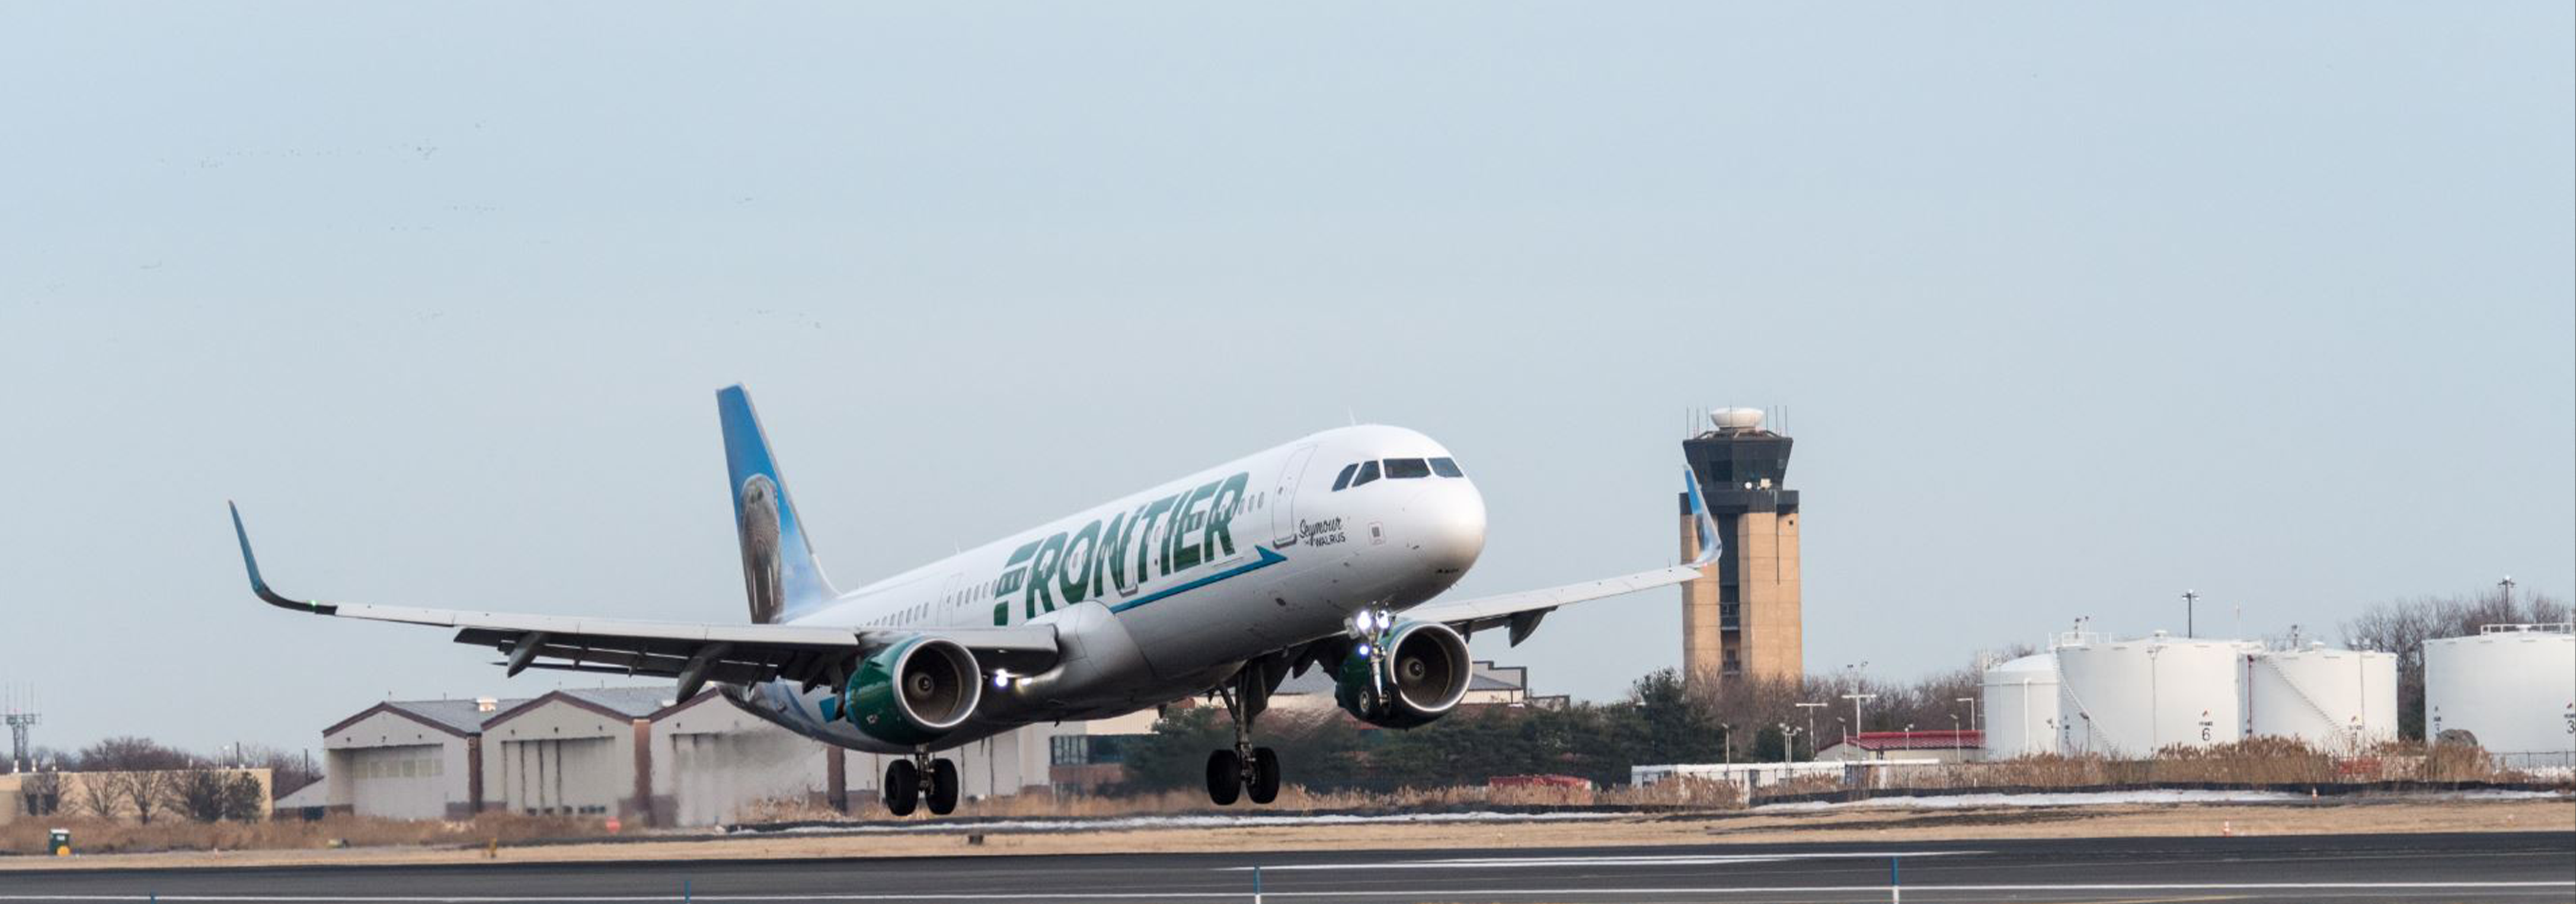 Frontier plane taking off